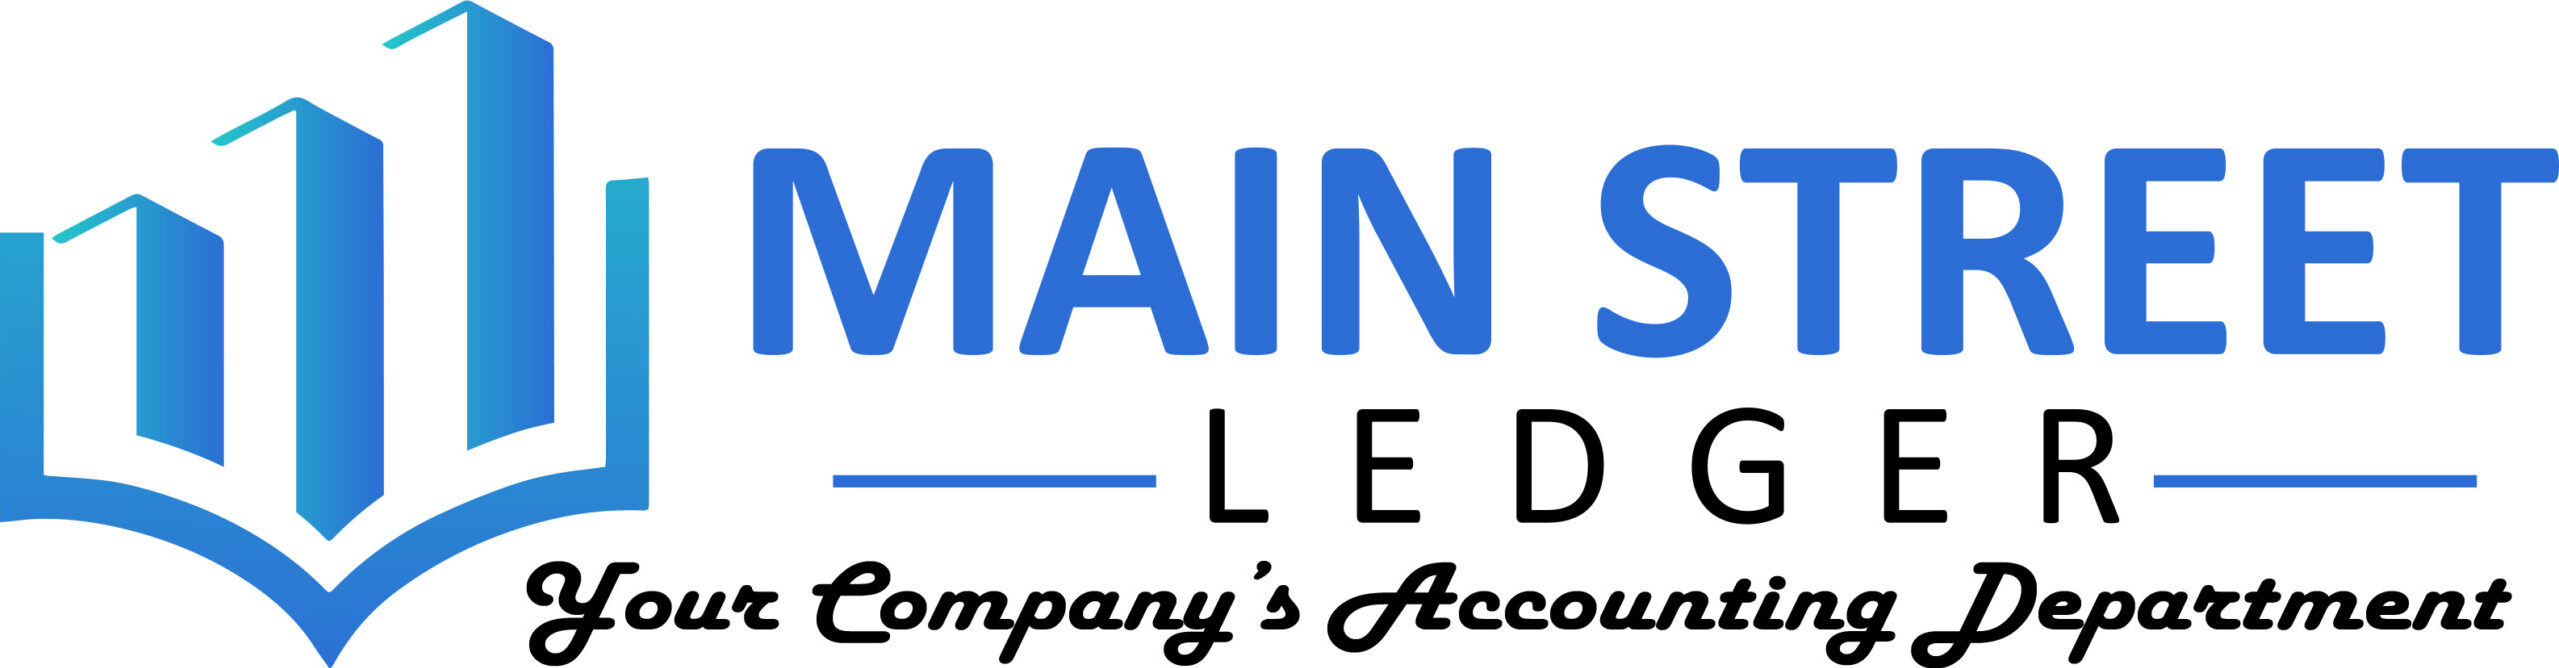 main street ledger, bookkeeping services